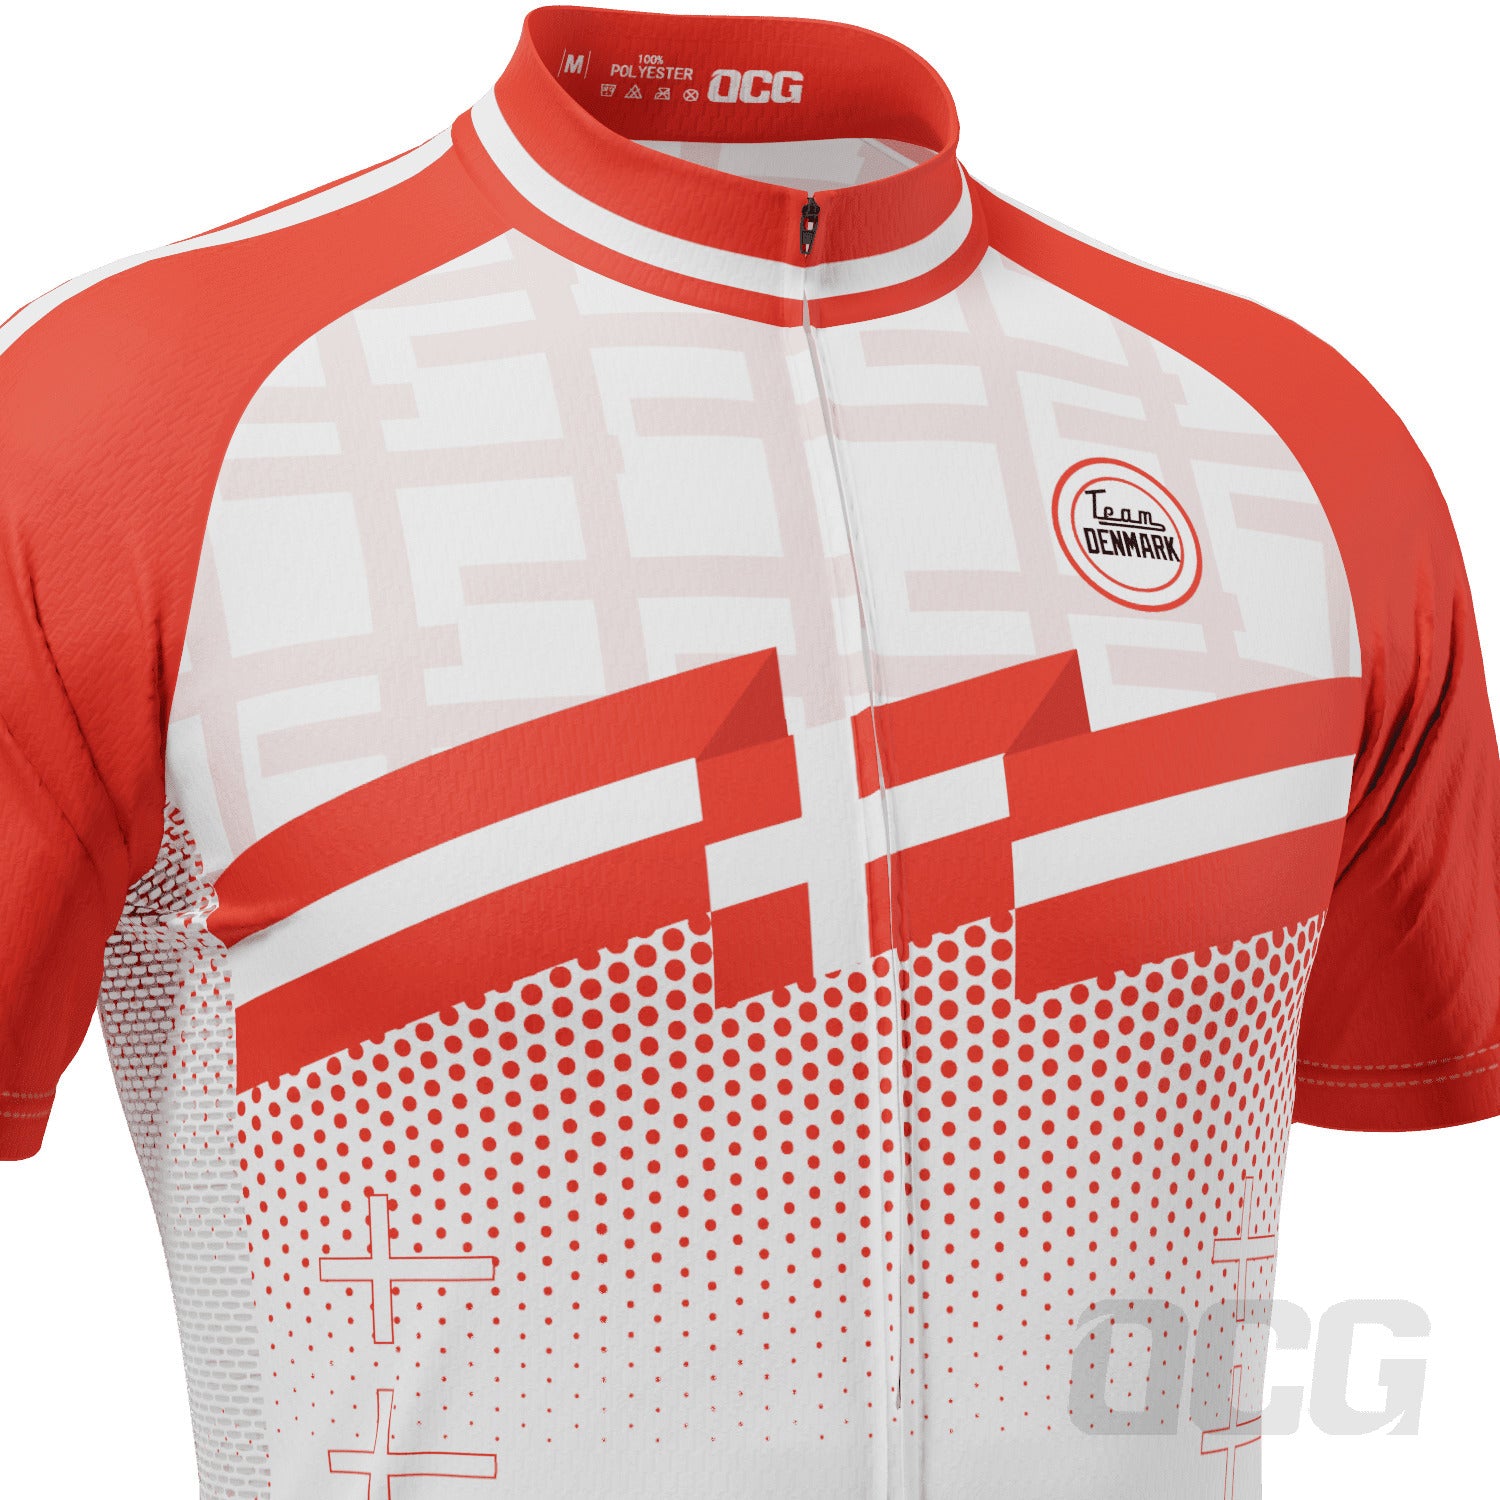 Men's World Countries Team Denmark Icon Short Sleeve Cycling Jersey